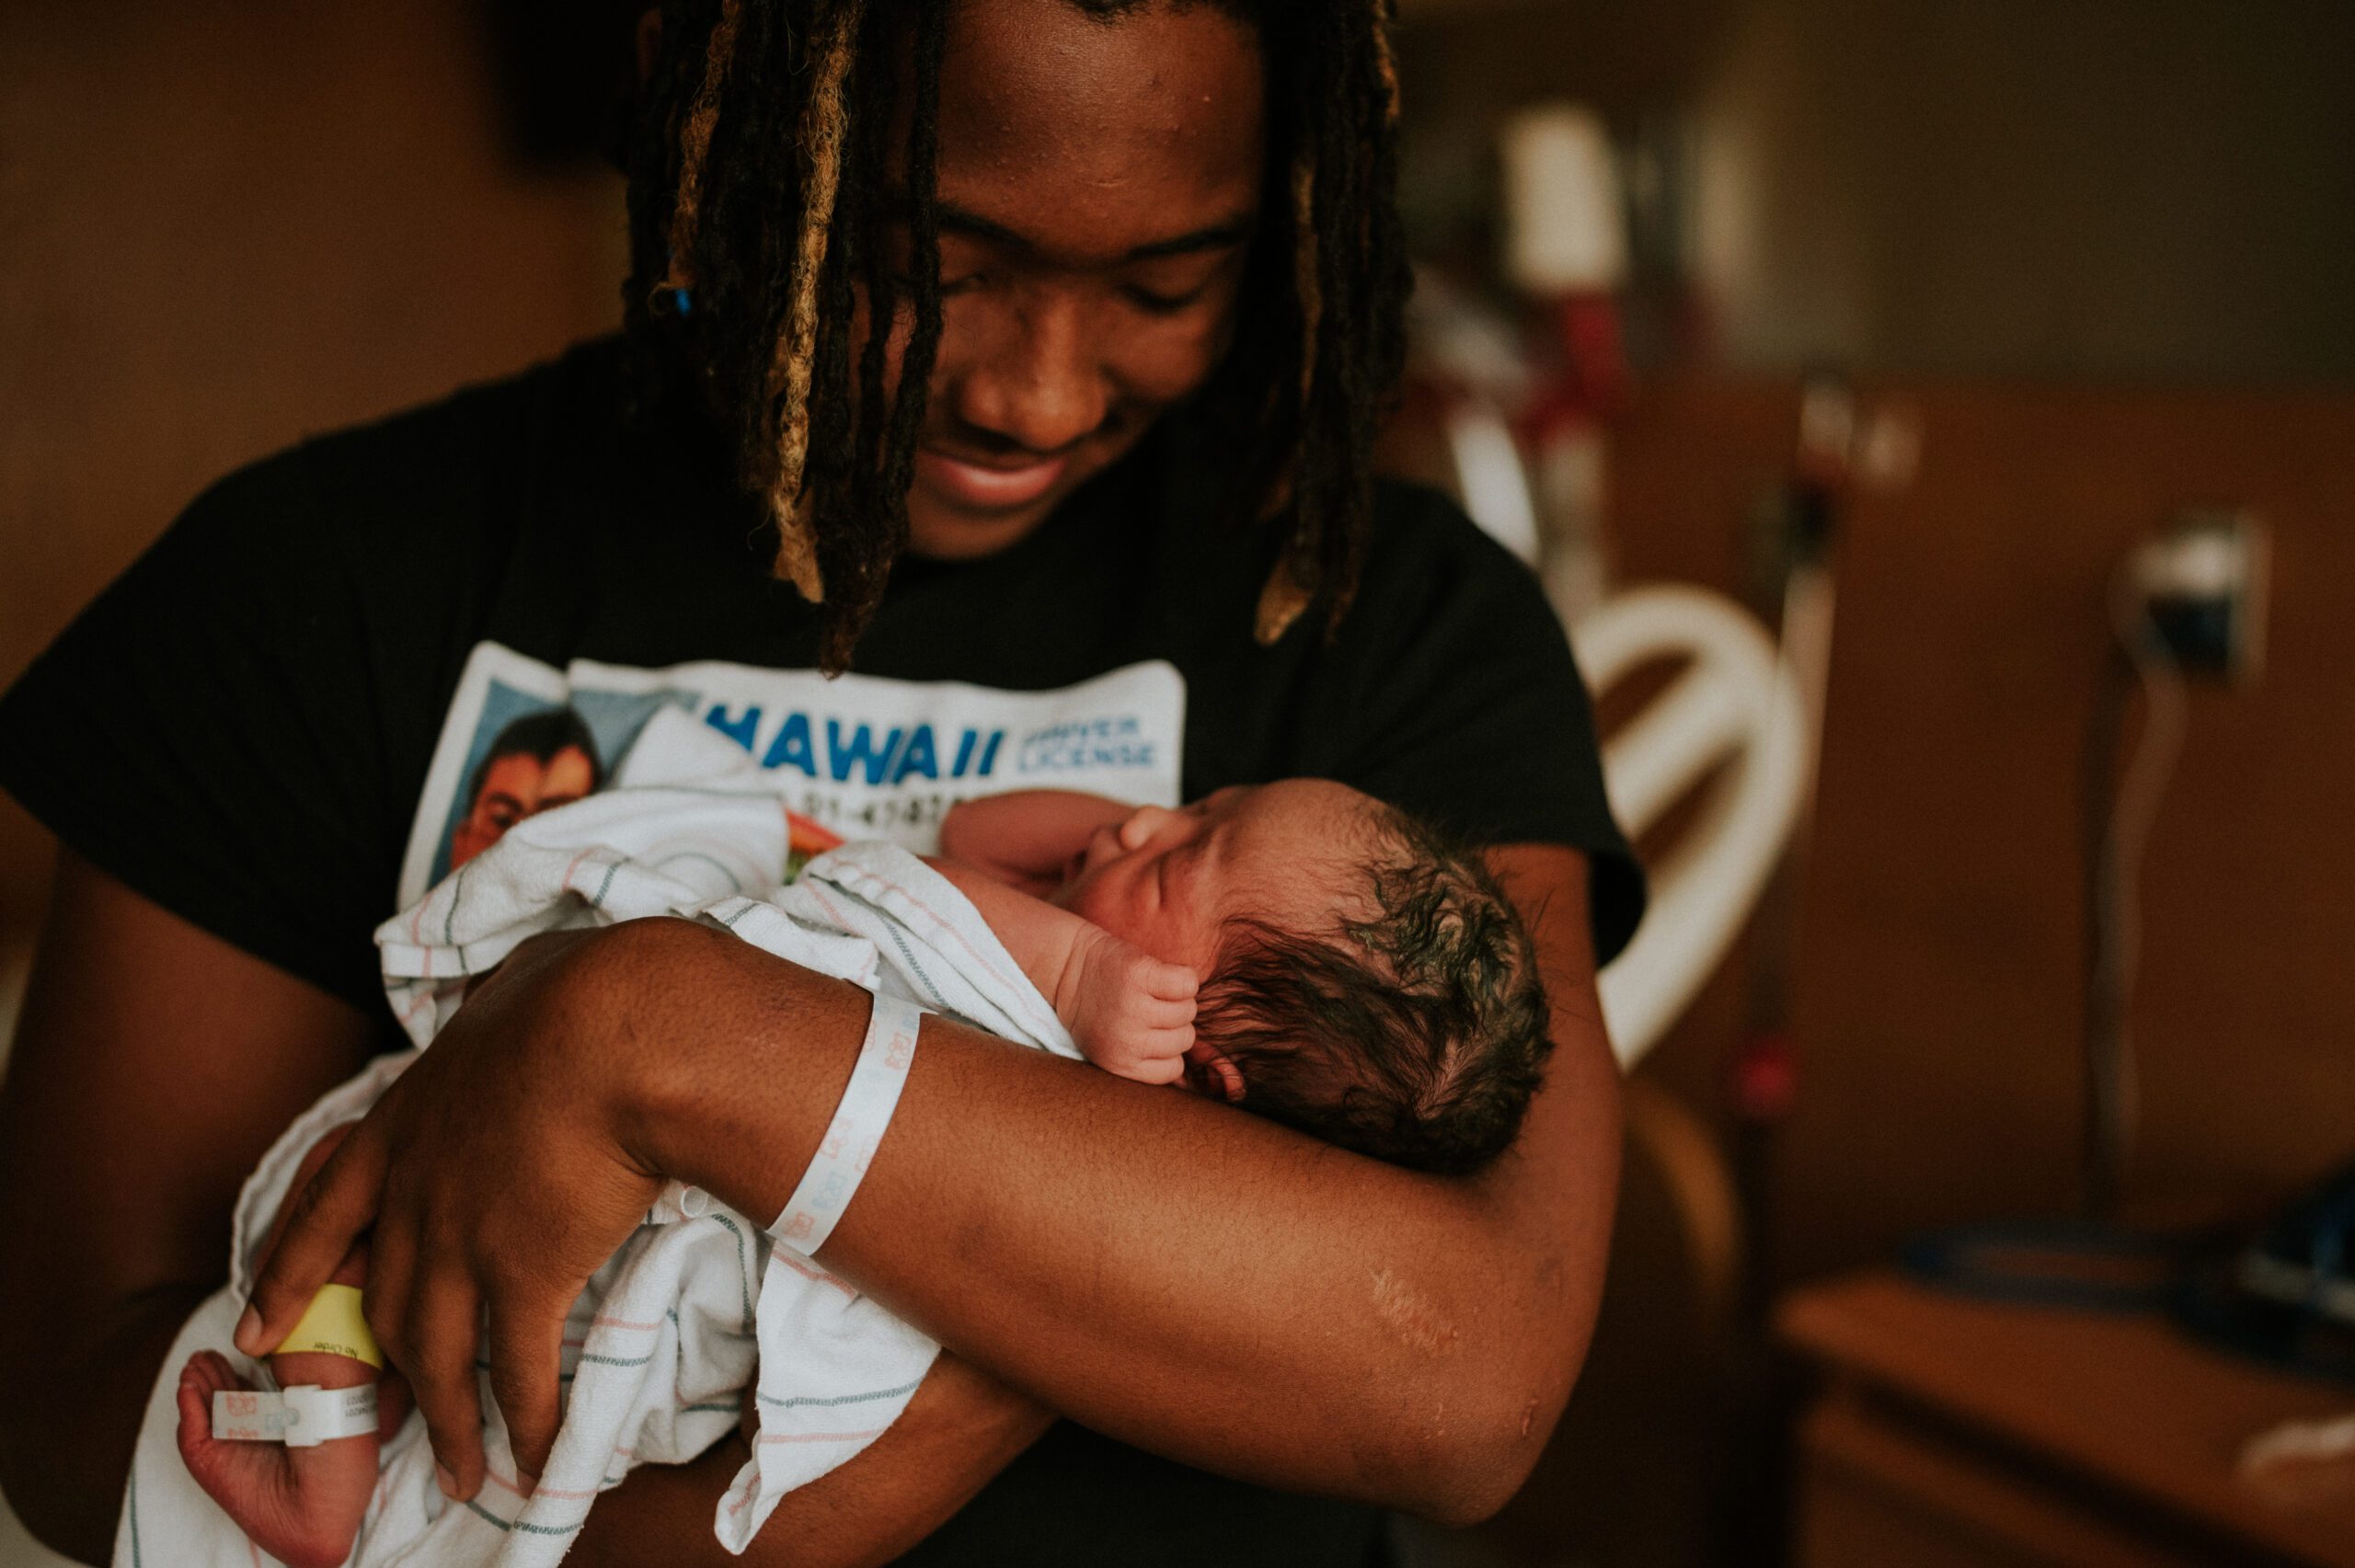 New Father holding baby in the hospital